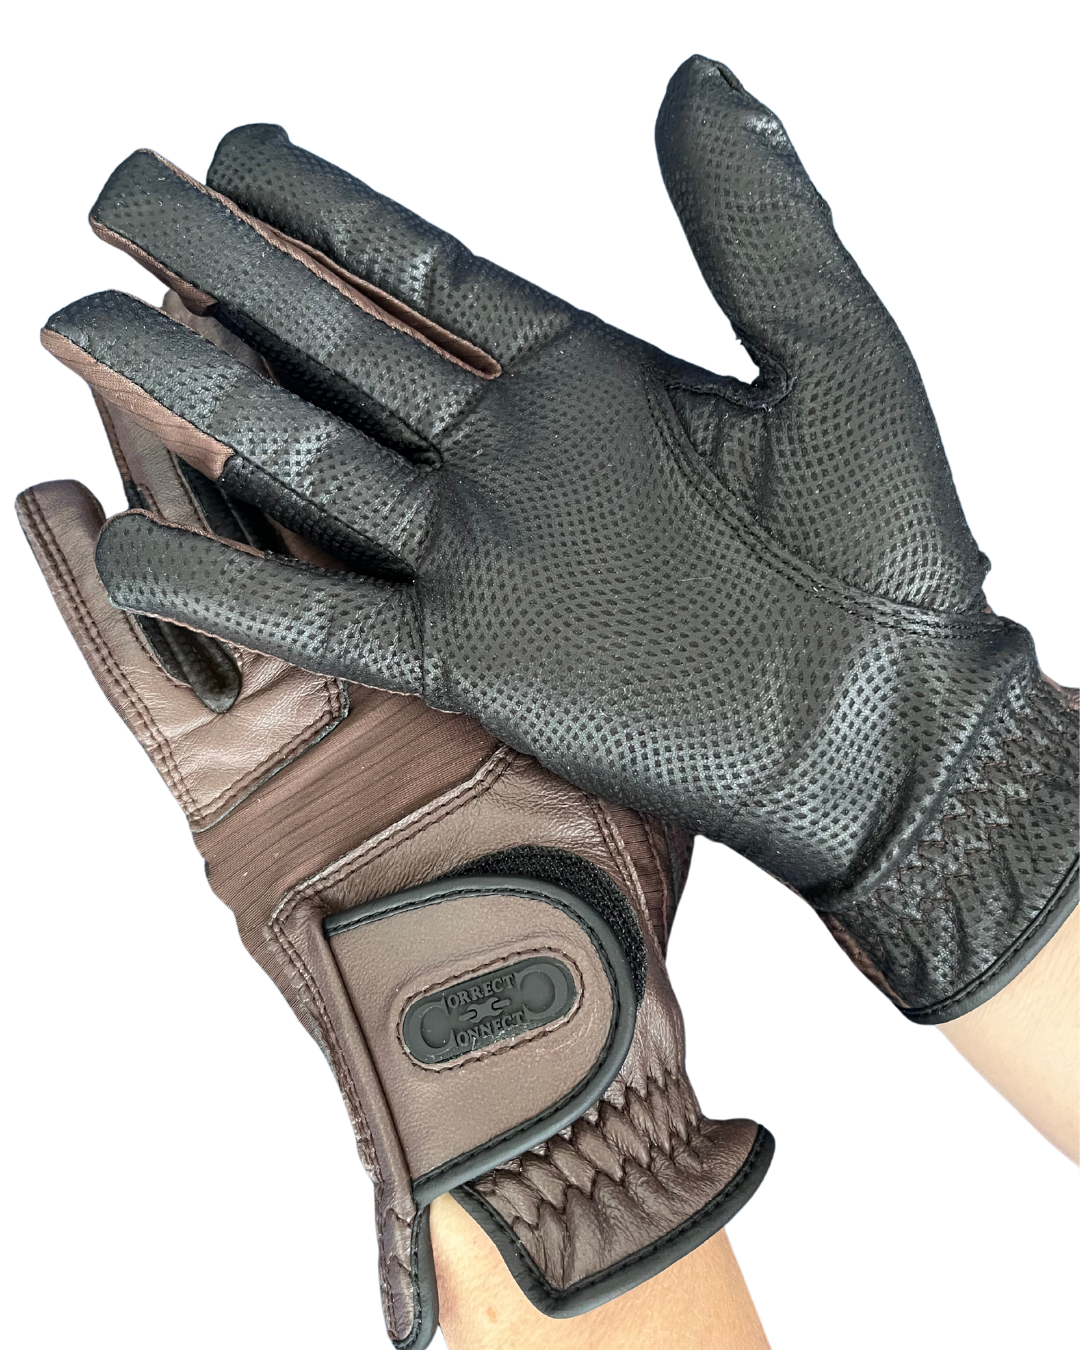 Tackified Coppertech Leather Premium Riding Glove in Brown